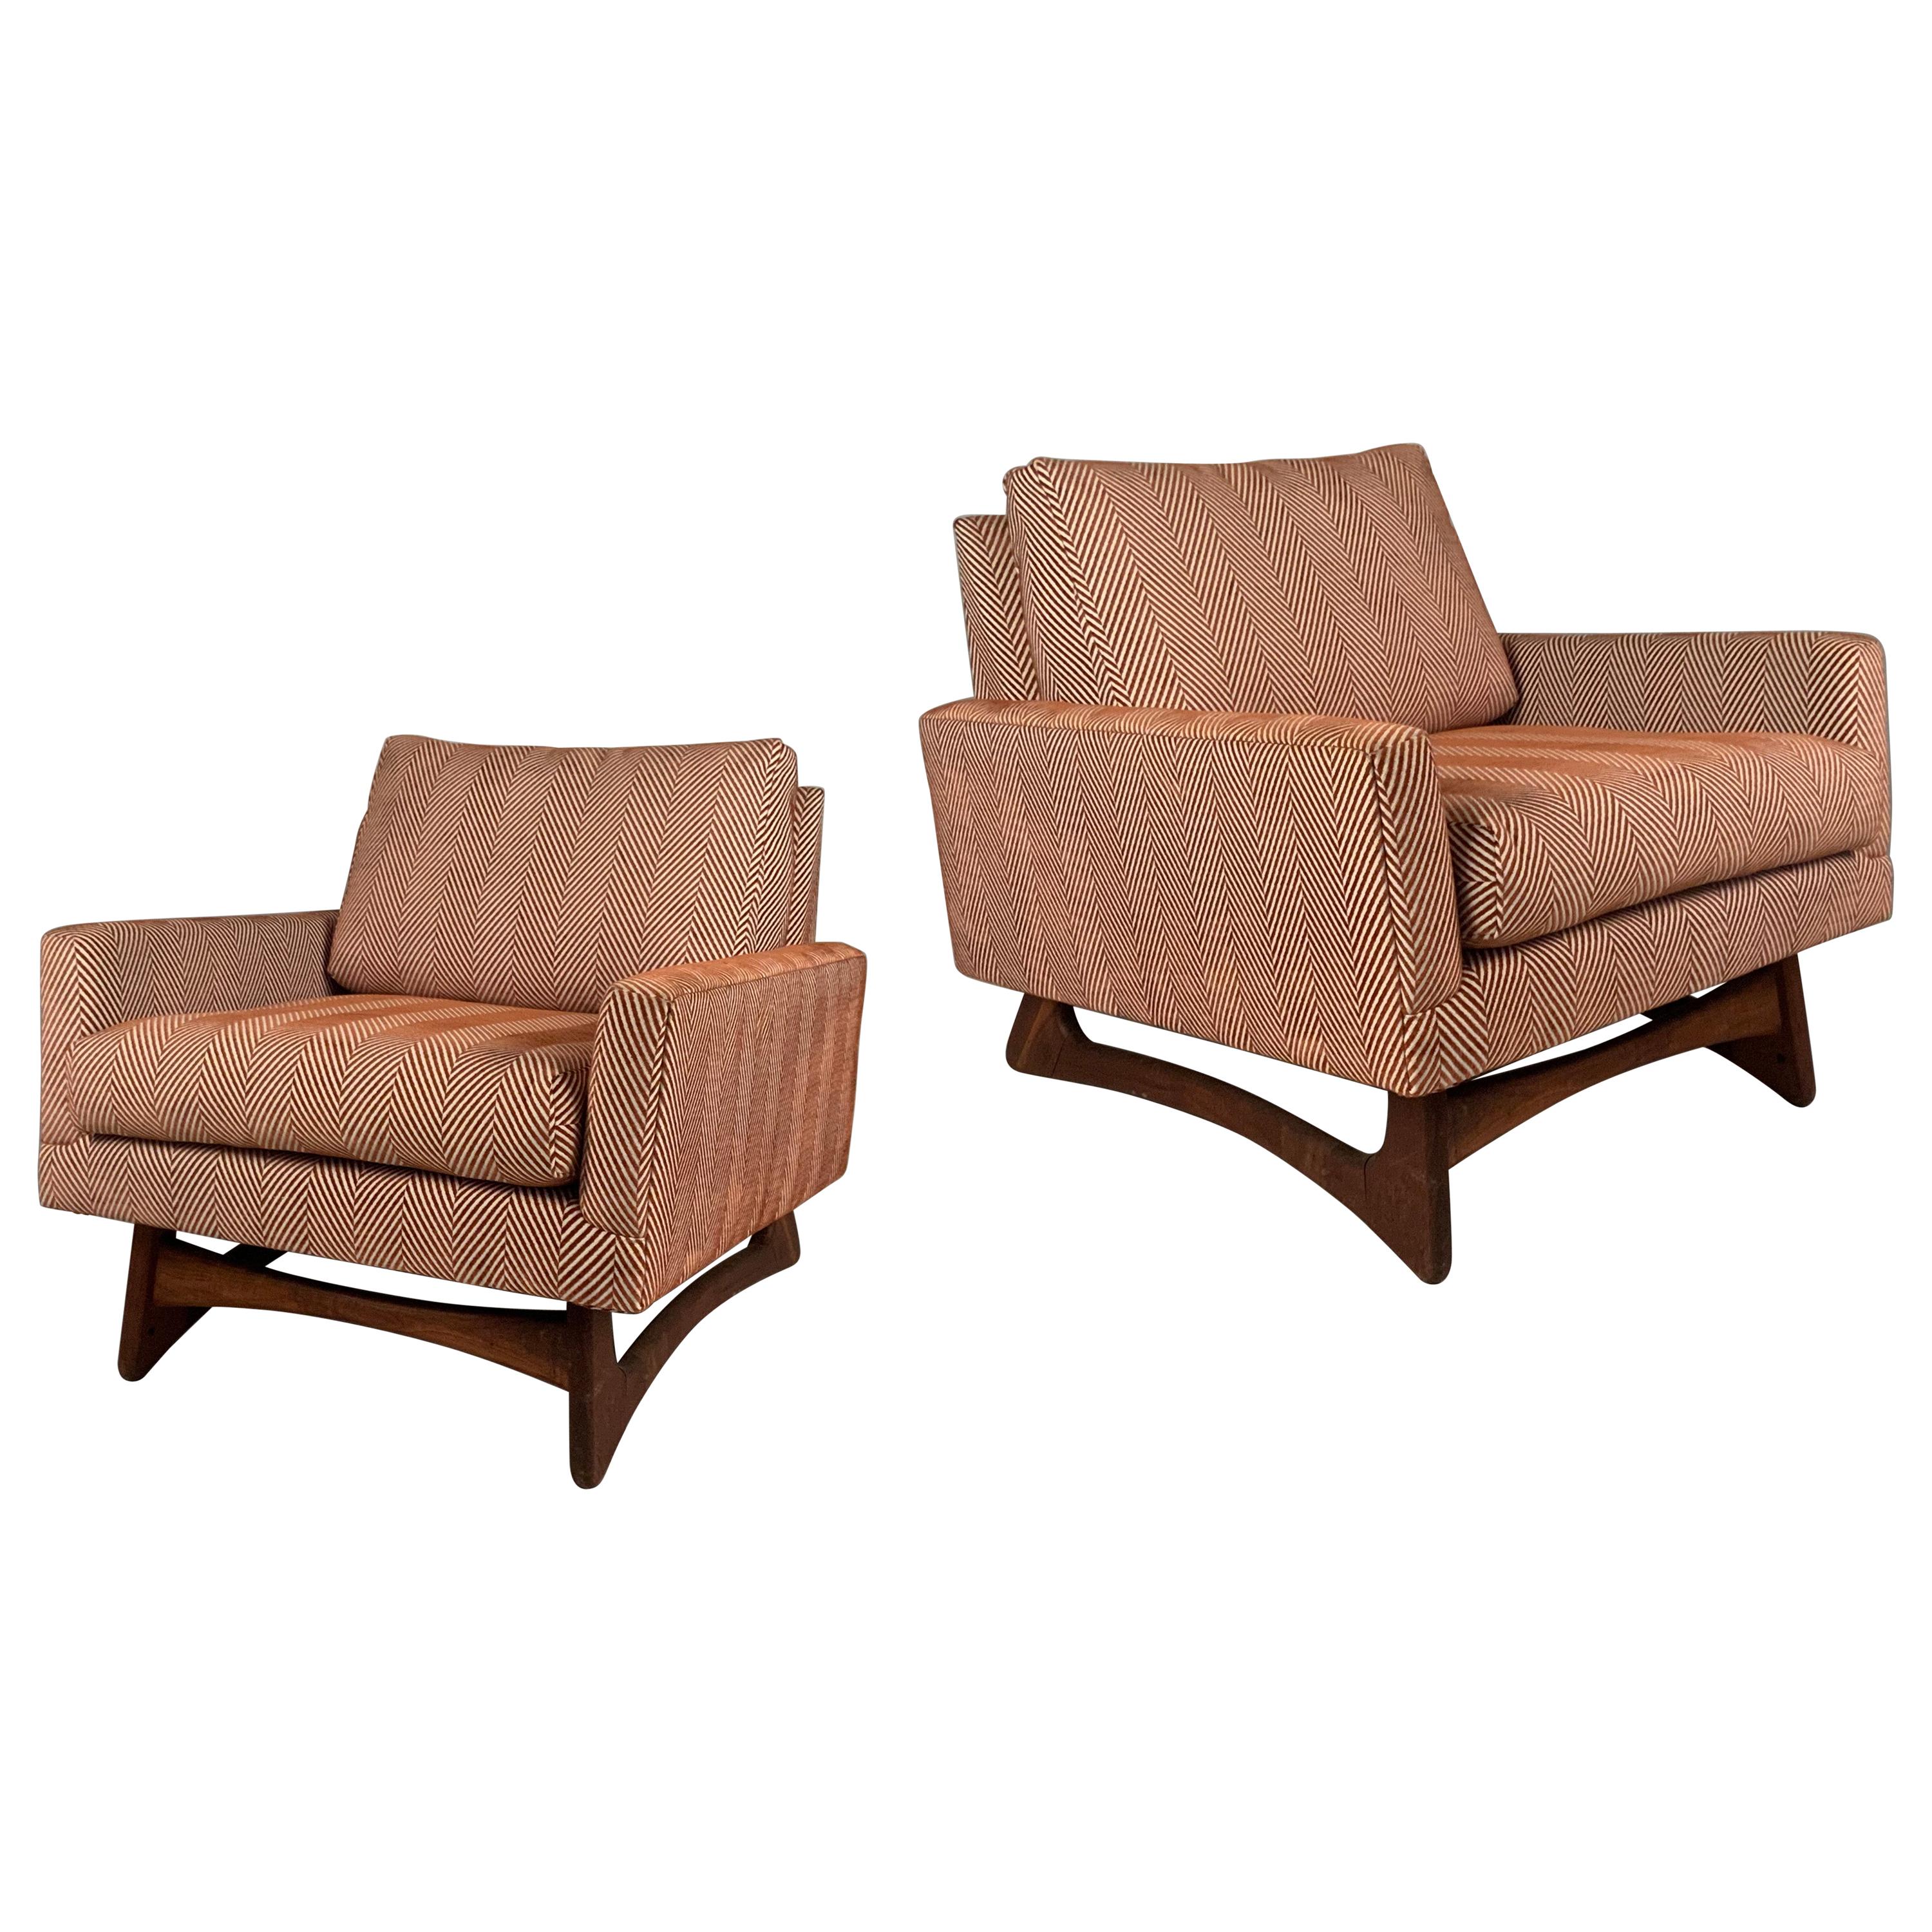 Pair of 1950's Walnut Base Lounge Chairs by Adrian Pearsall for Craft Associates